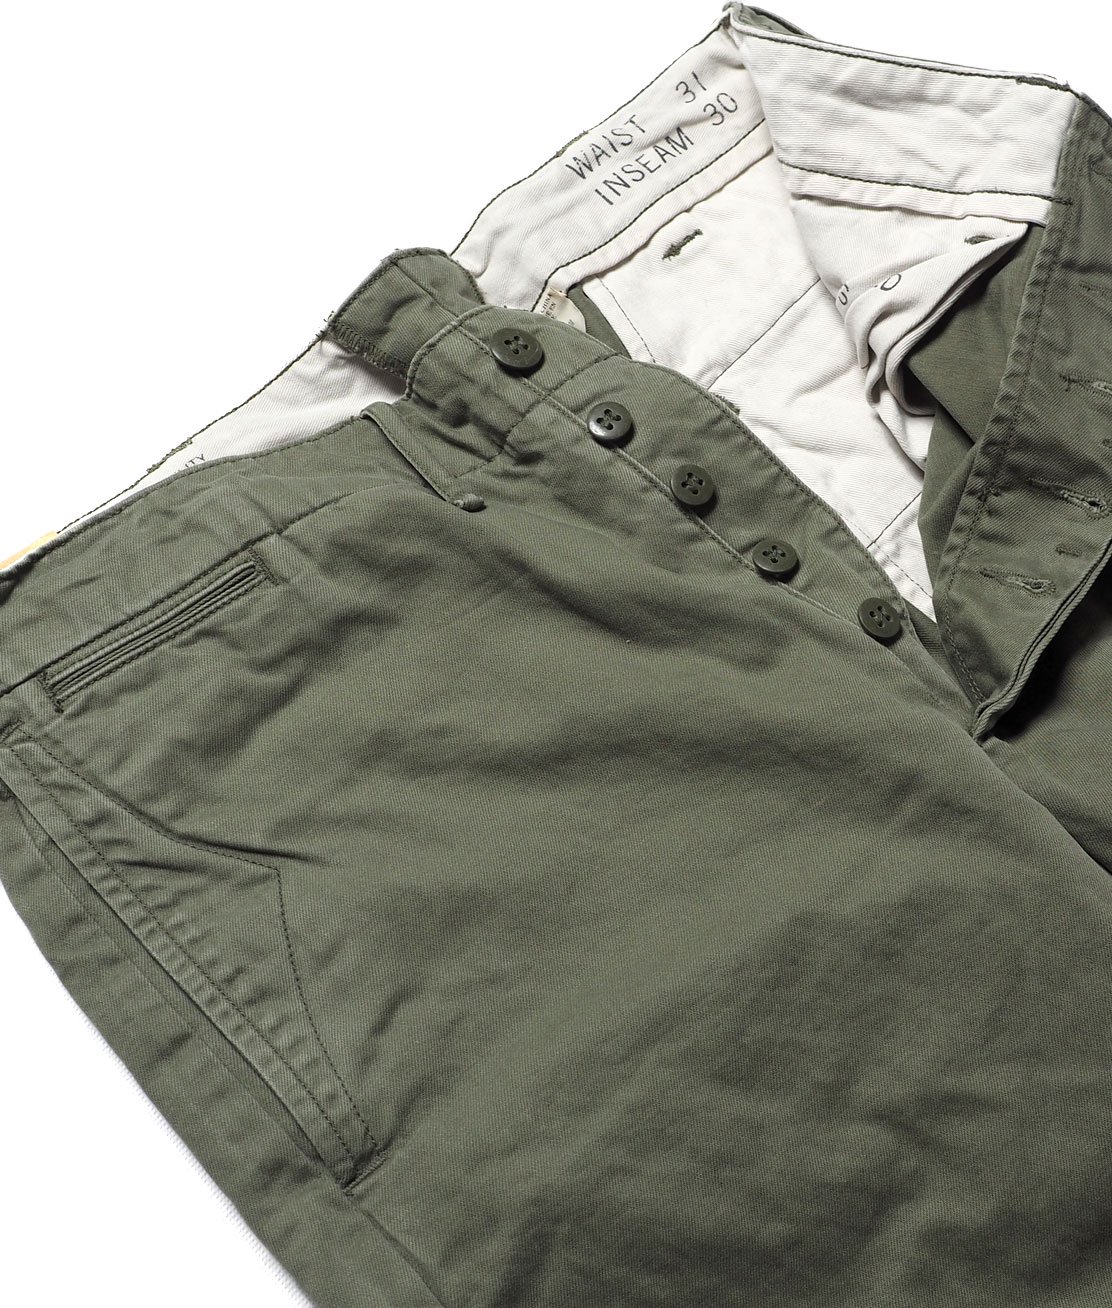 【RRL】OFFICER'S FLAT FRONT CHINO (w29 - w31) - OLIVE チノ パンツ - HUNKY DORY